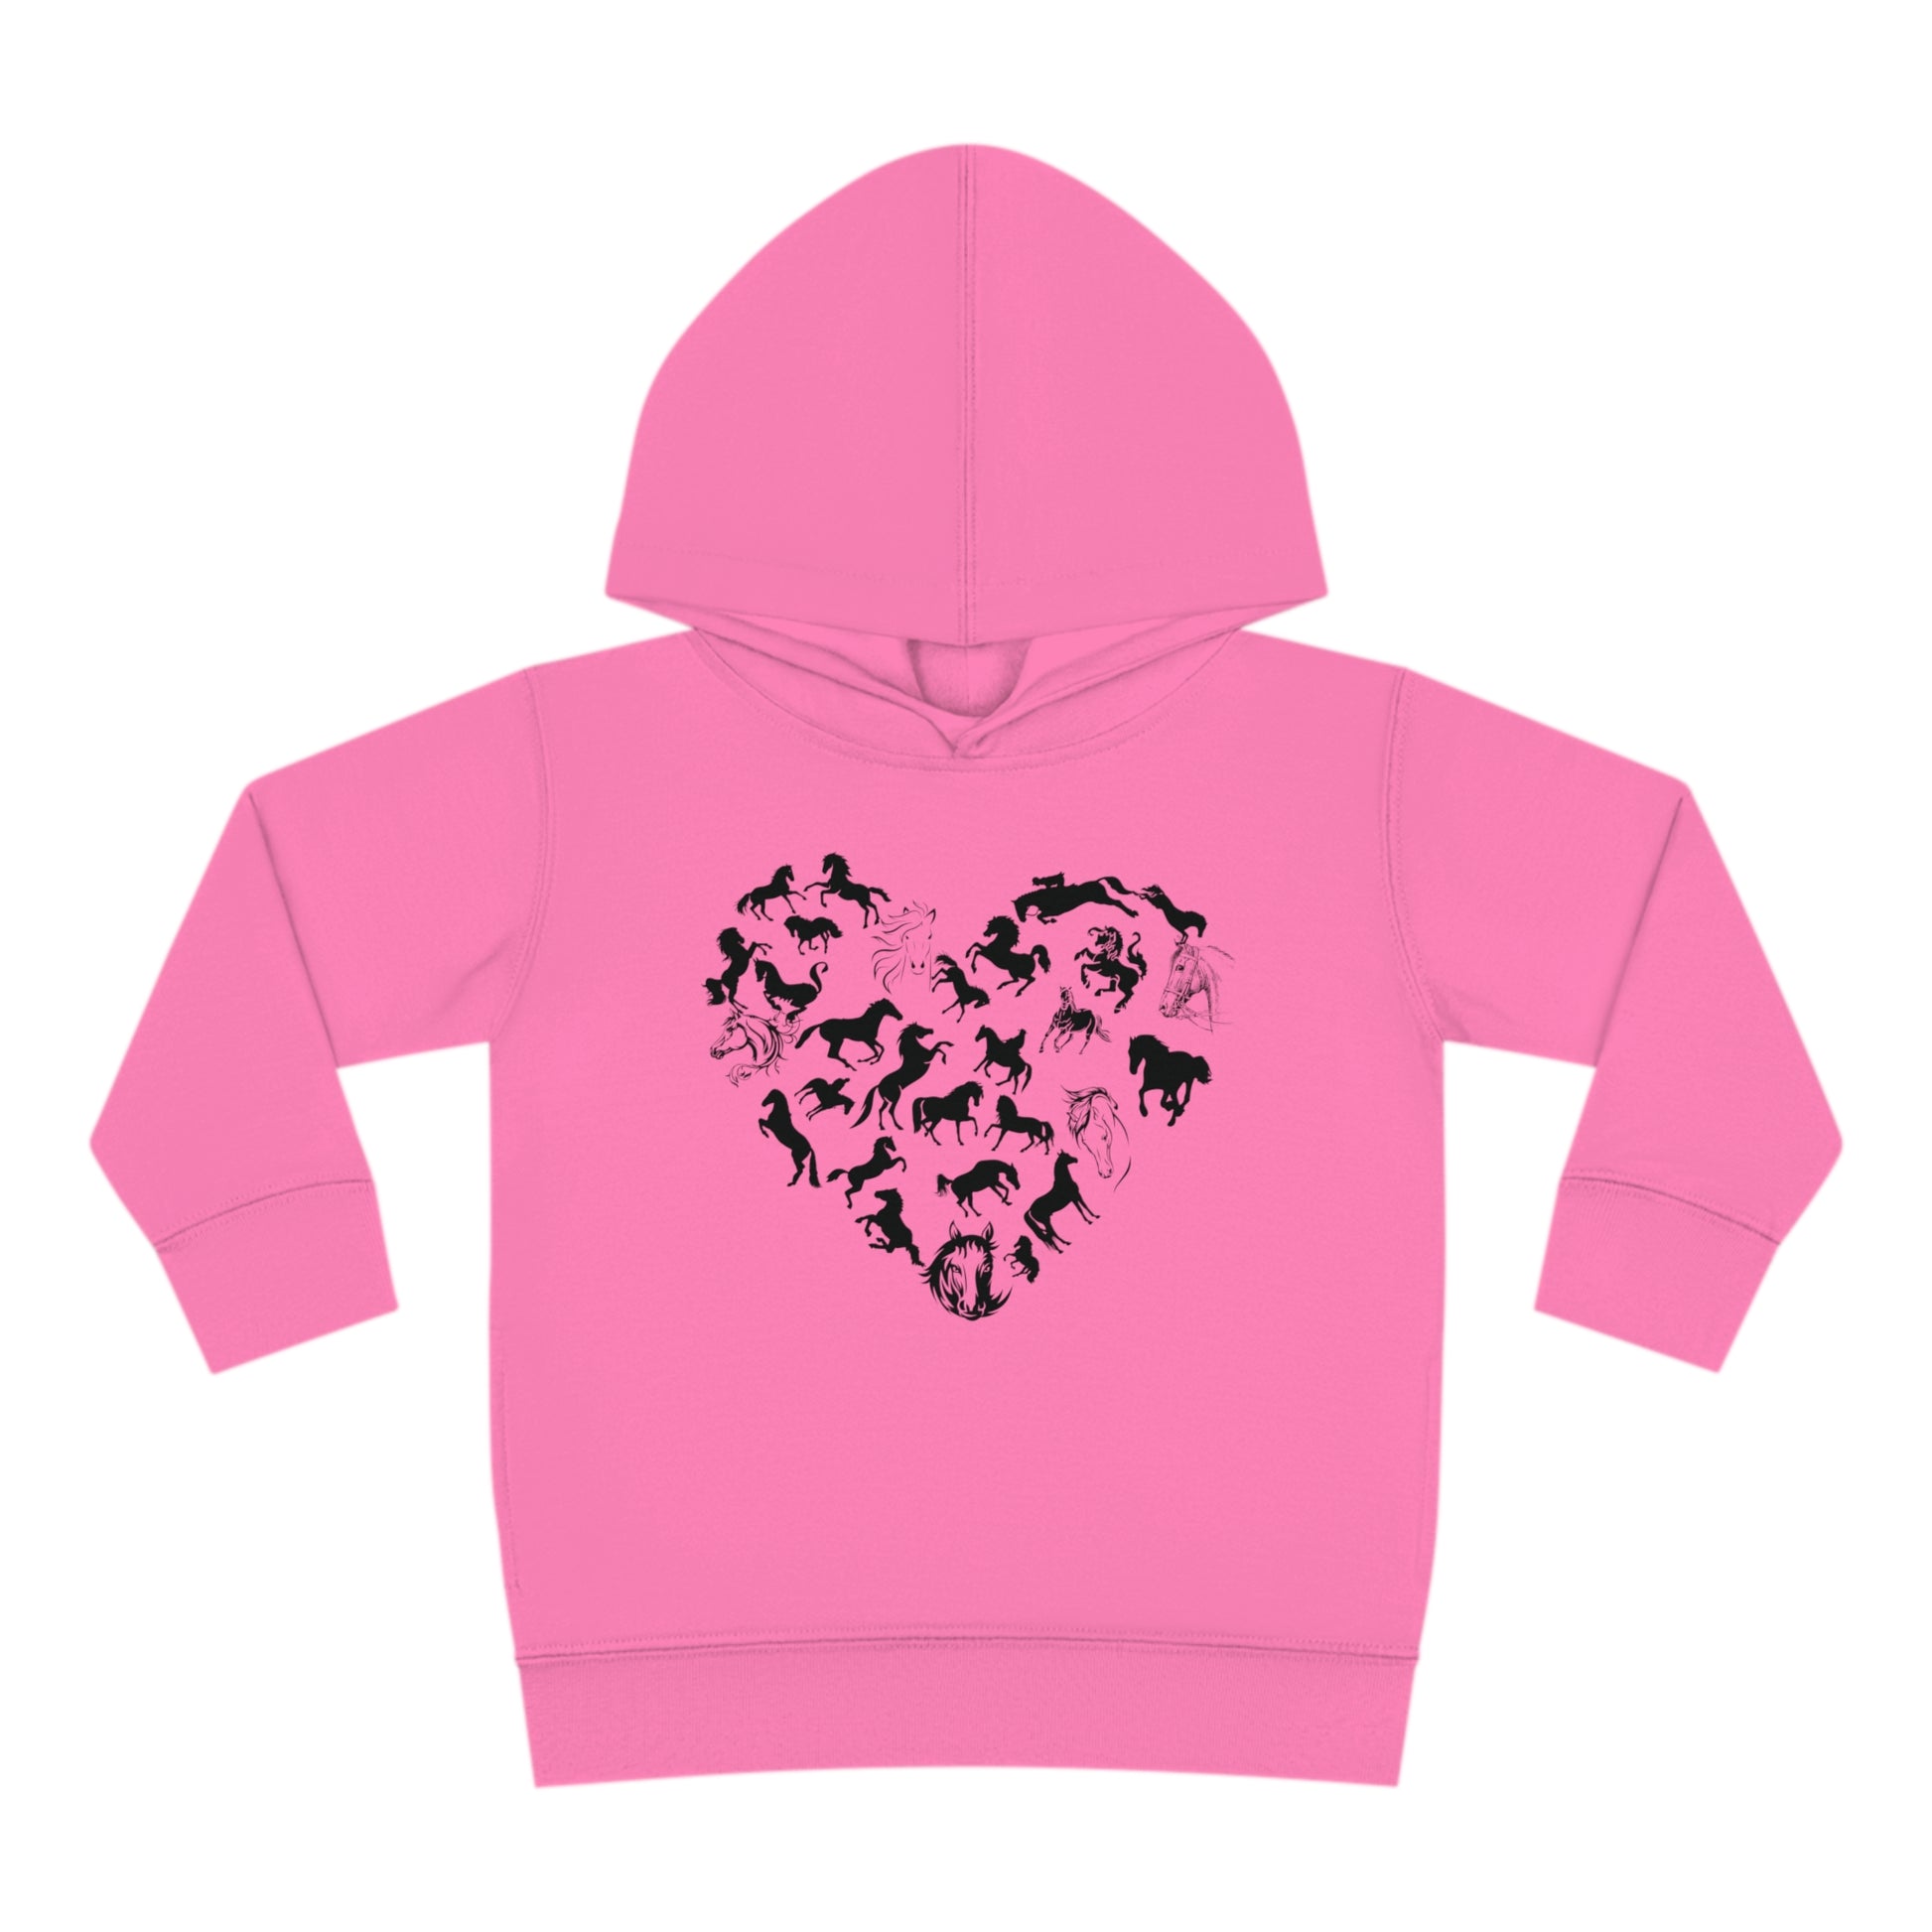 Horse Heart Hoodie | Horse Lover Tee - Horses Heart Toddler - Horse Lover Gift - Horse Toddler Shirt - Equestrian Tee - Gift for Horse Owner Kids clothes Raspberry 2T 